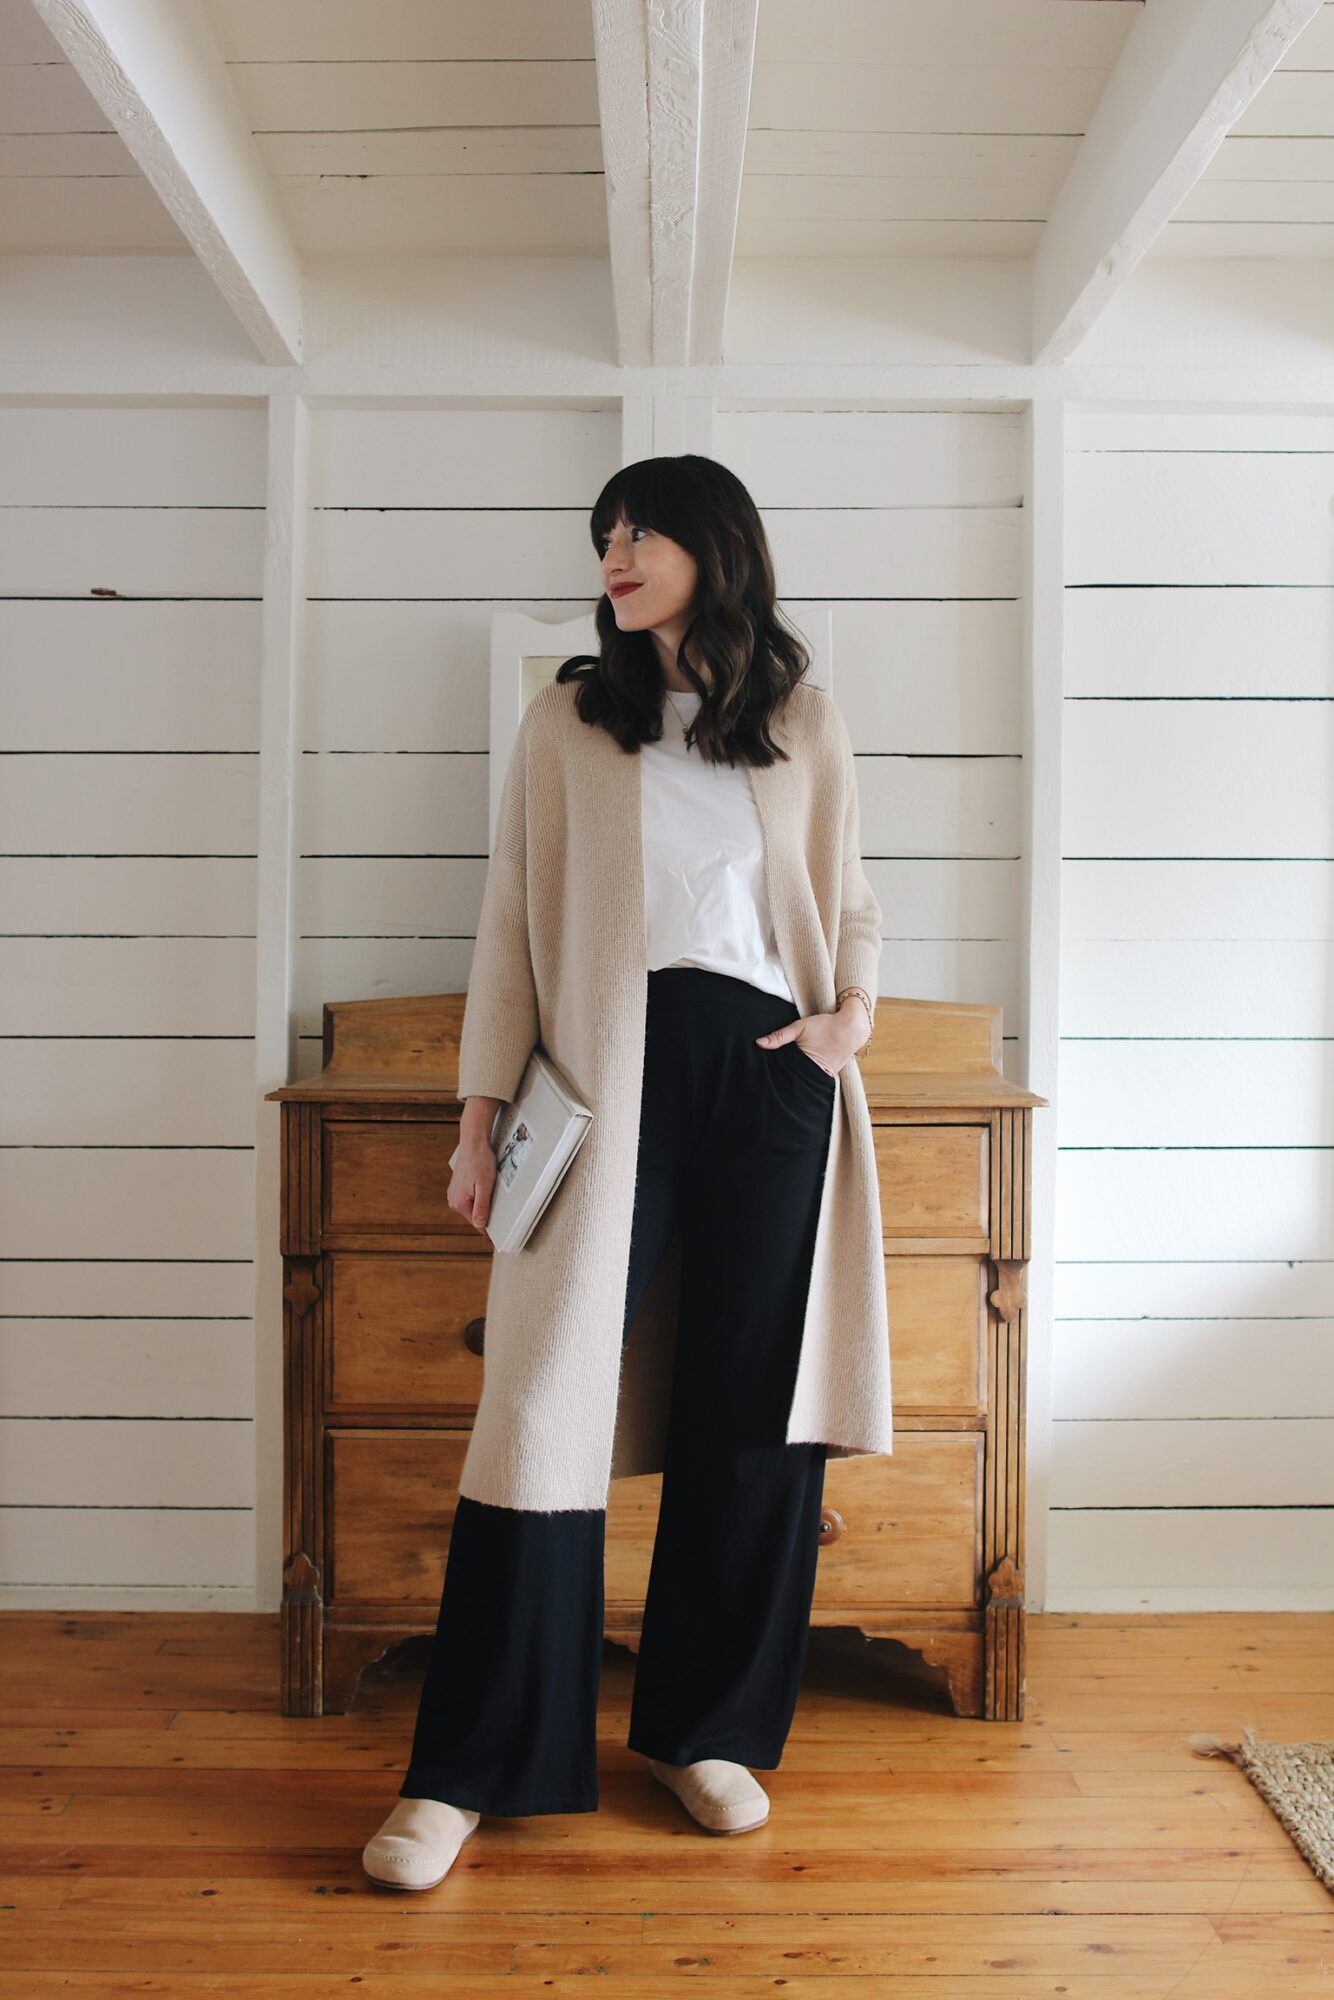 LONG CAMEL KNIT, WHITE TEE, BLACK WIDE LEG PANTS AND SUEDE CLOGS